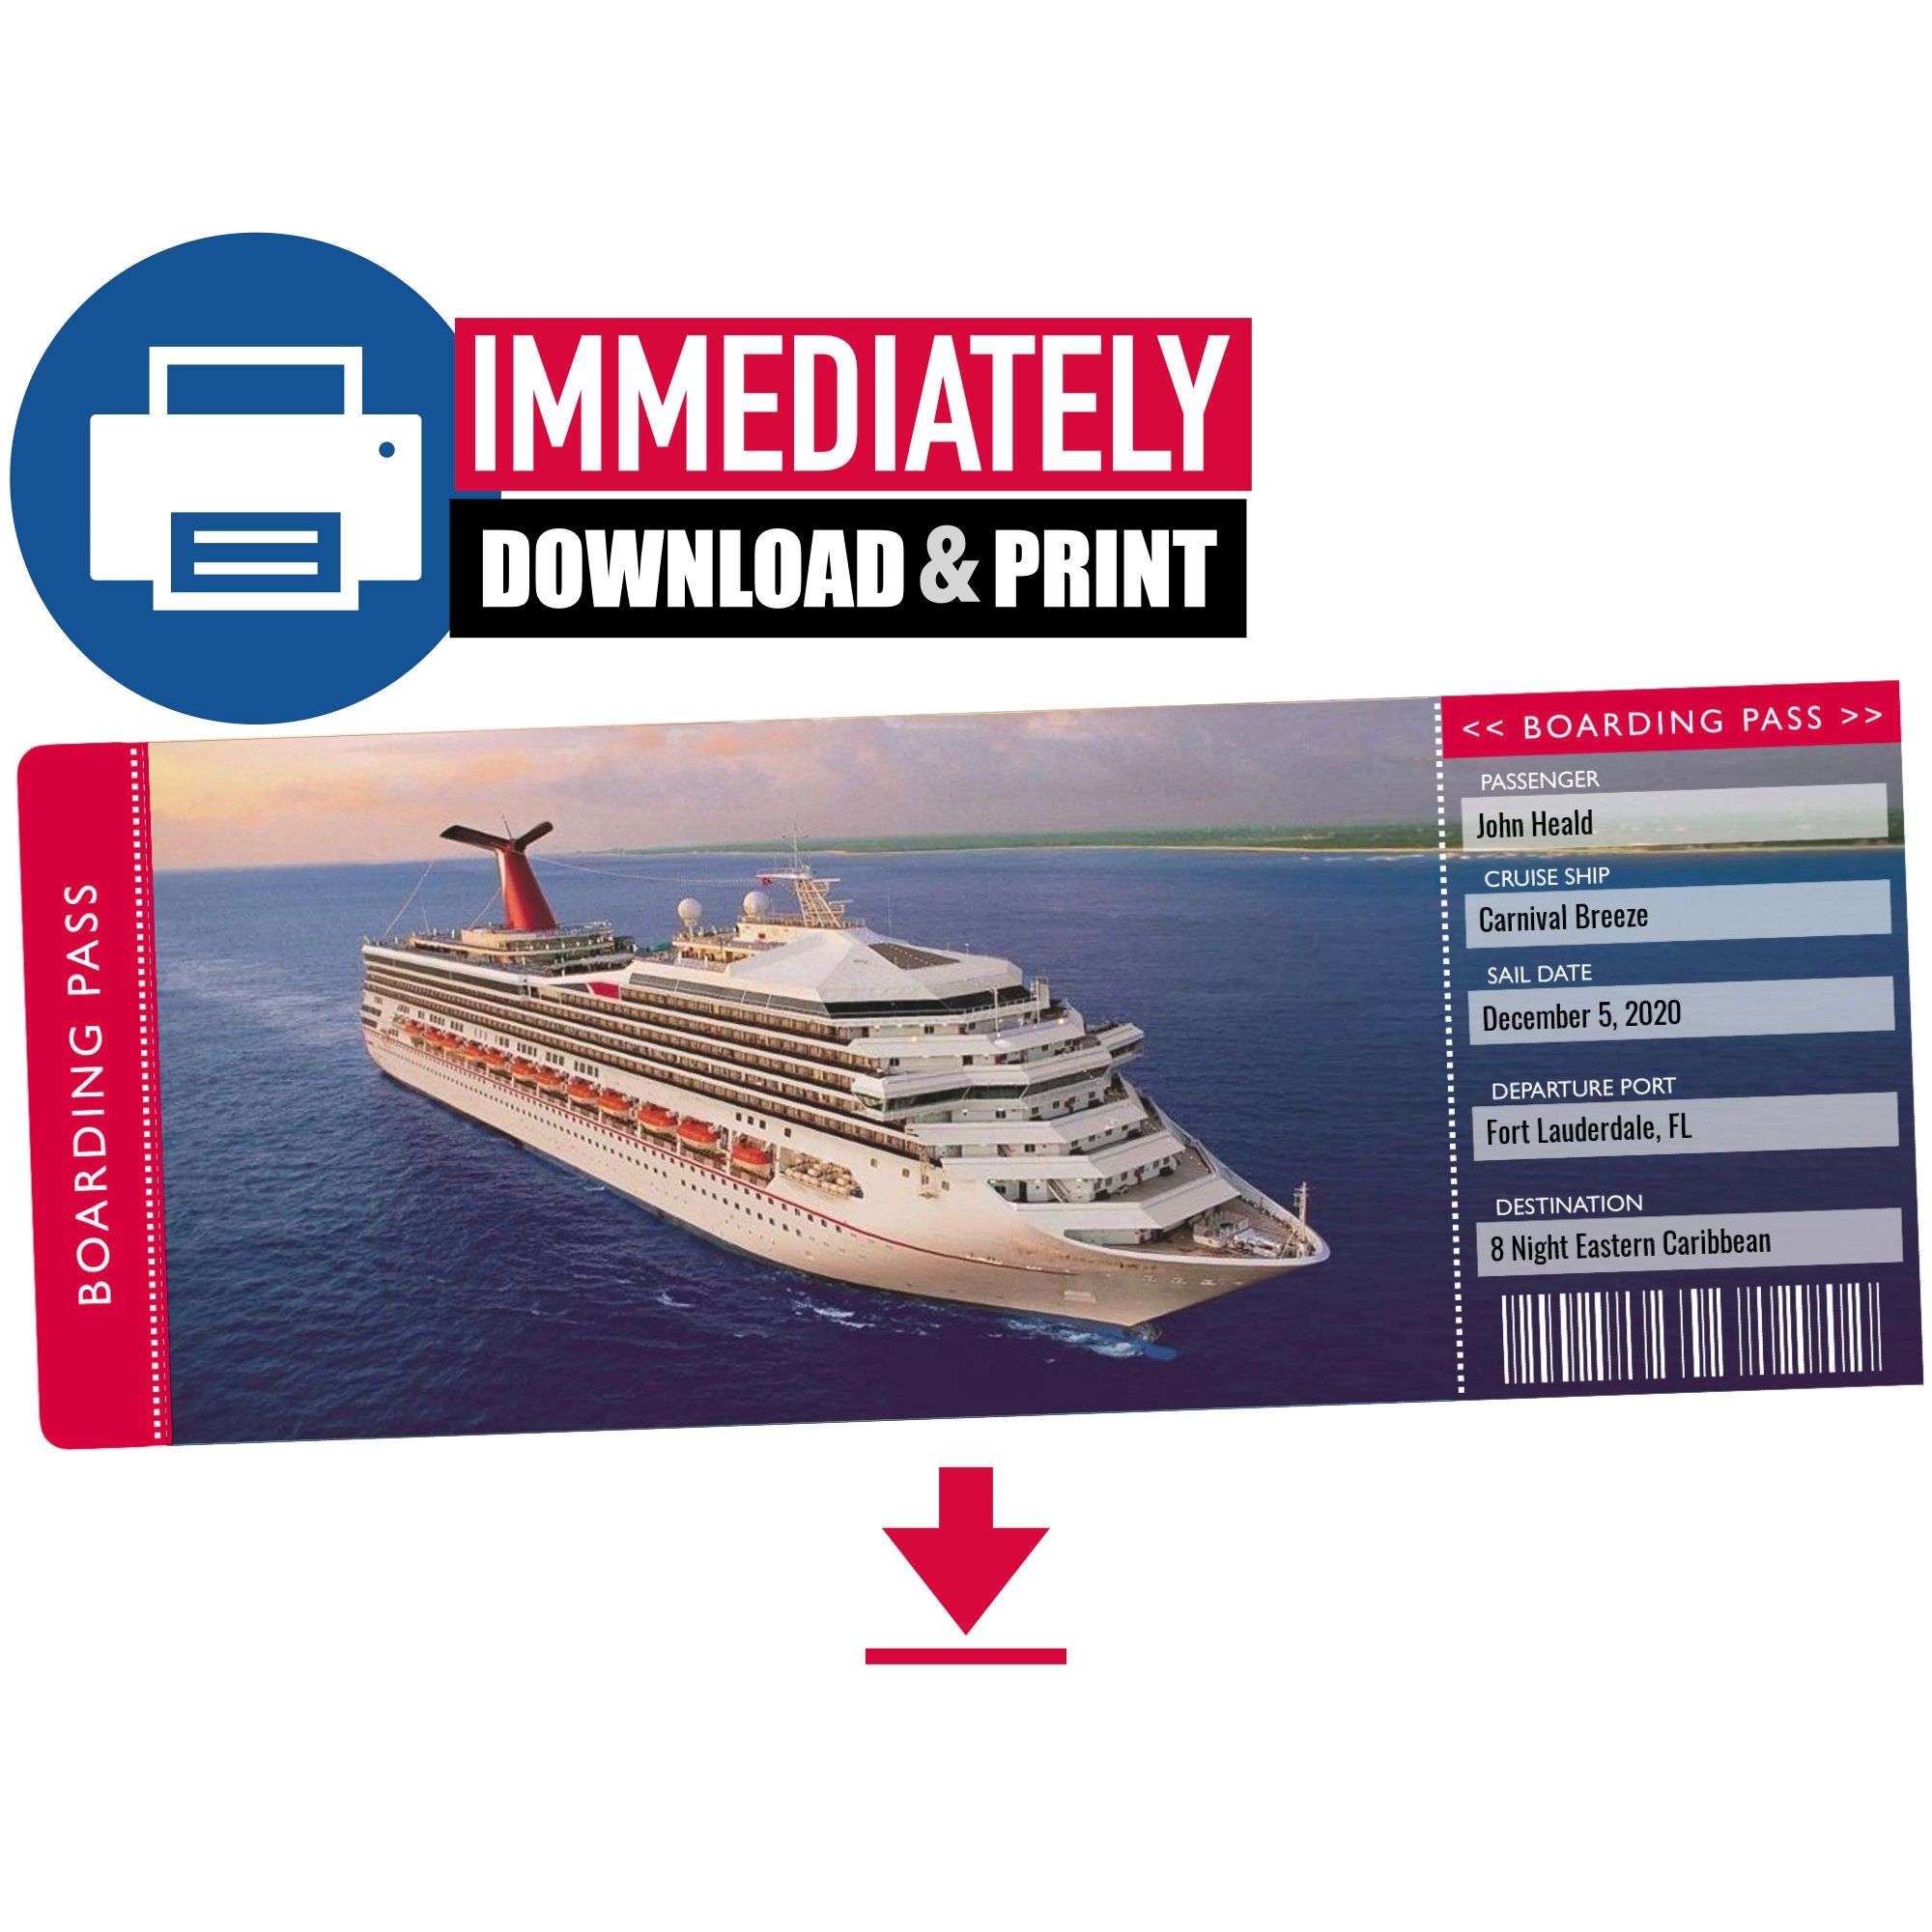 carnival cruise drink tickets